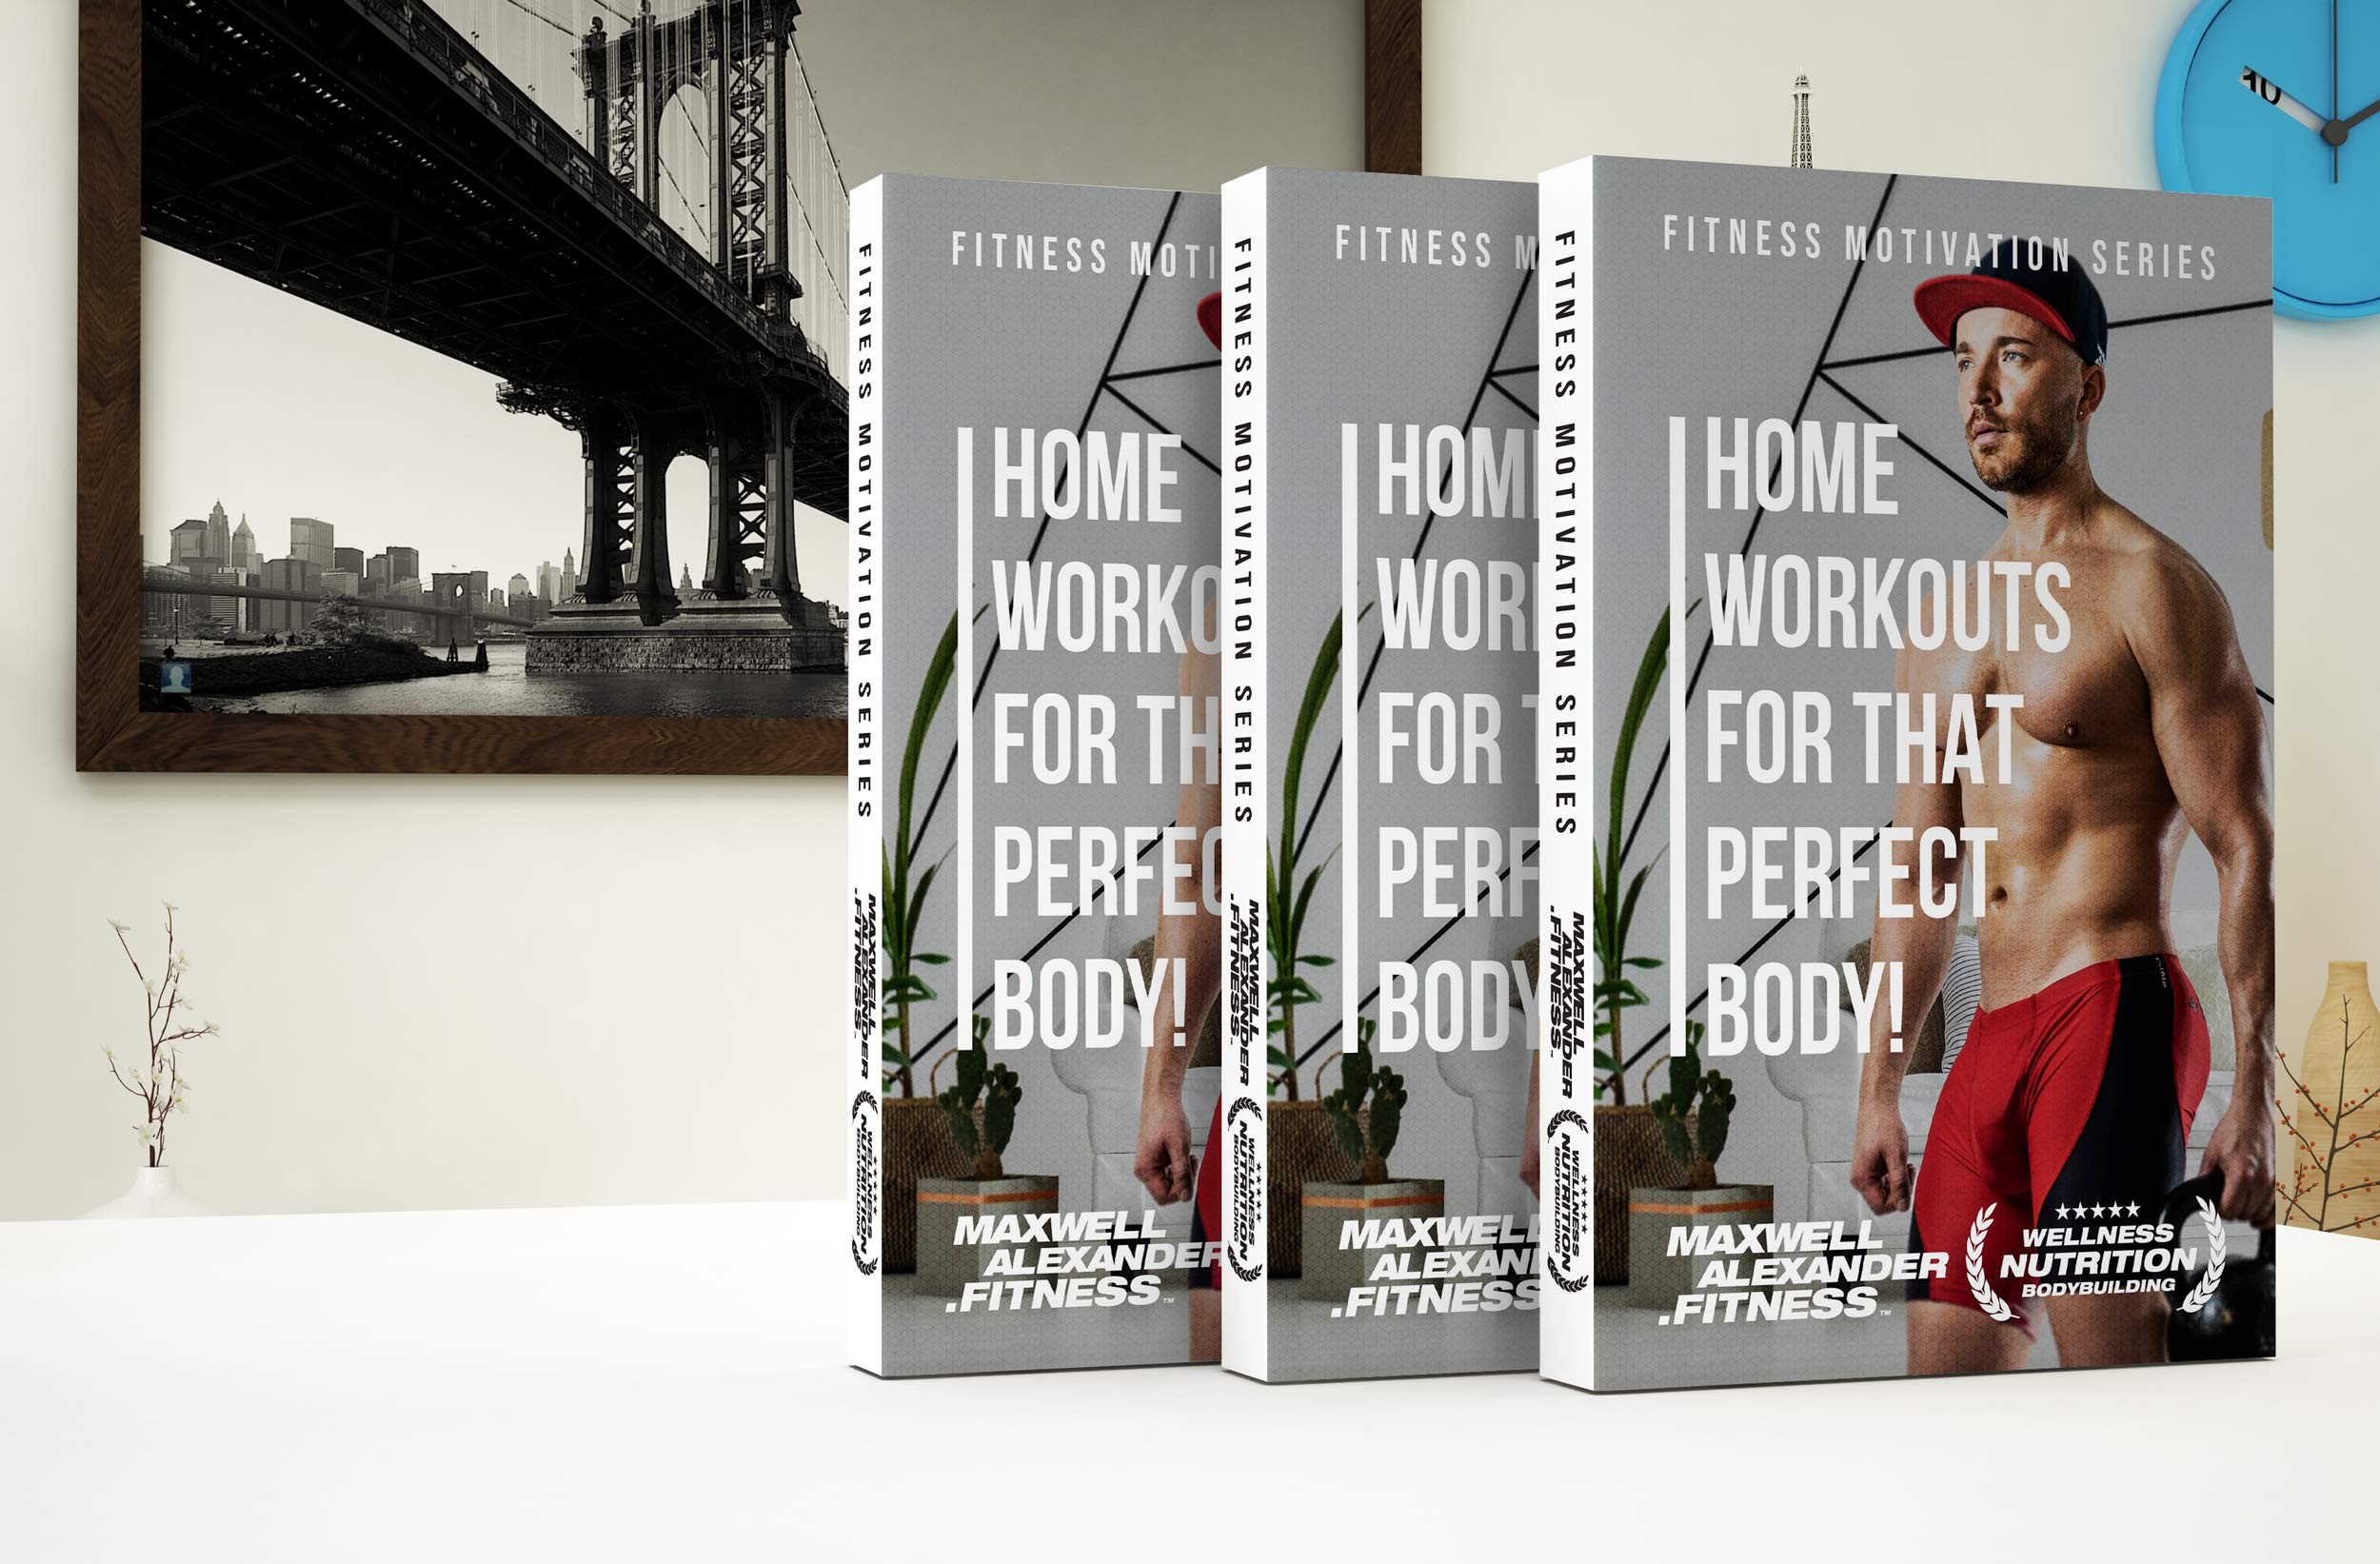 Discover Home Workouts for That Perfect Body - Fitness Motivation Book Series by Maxwell Alexander